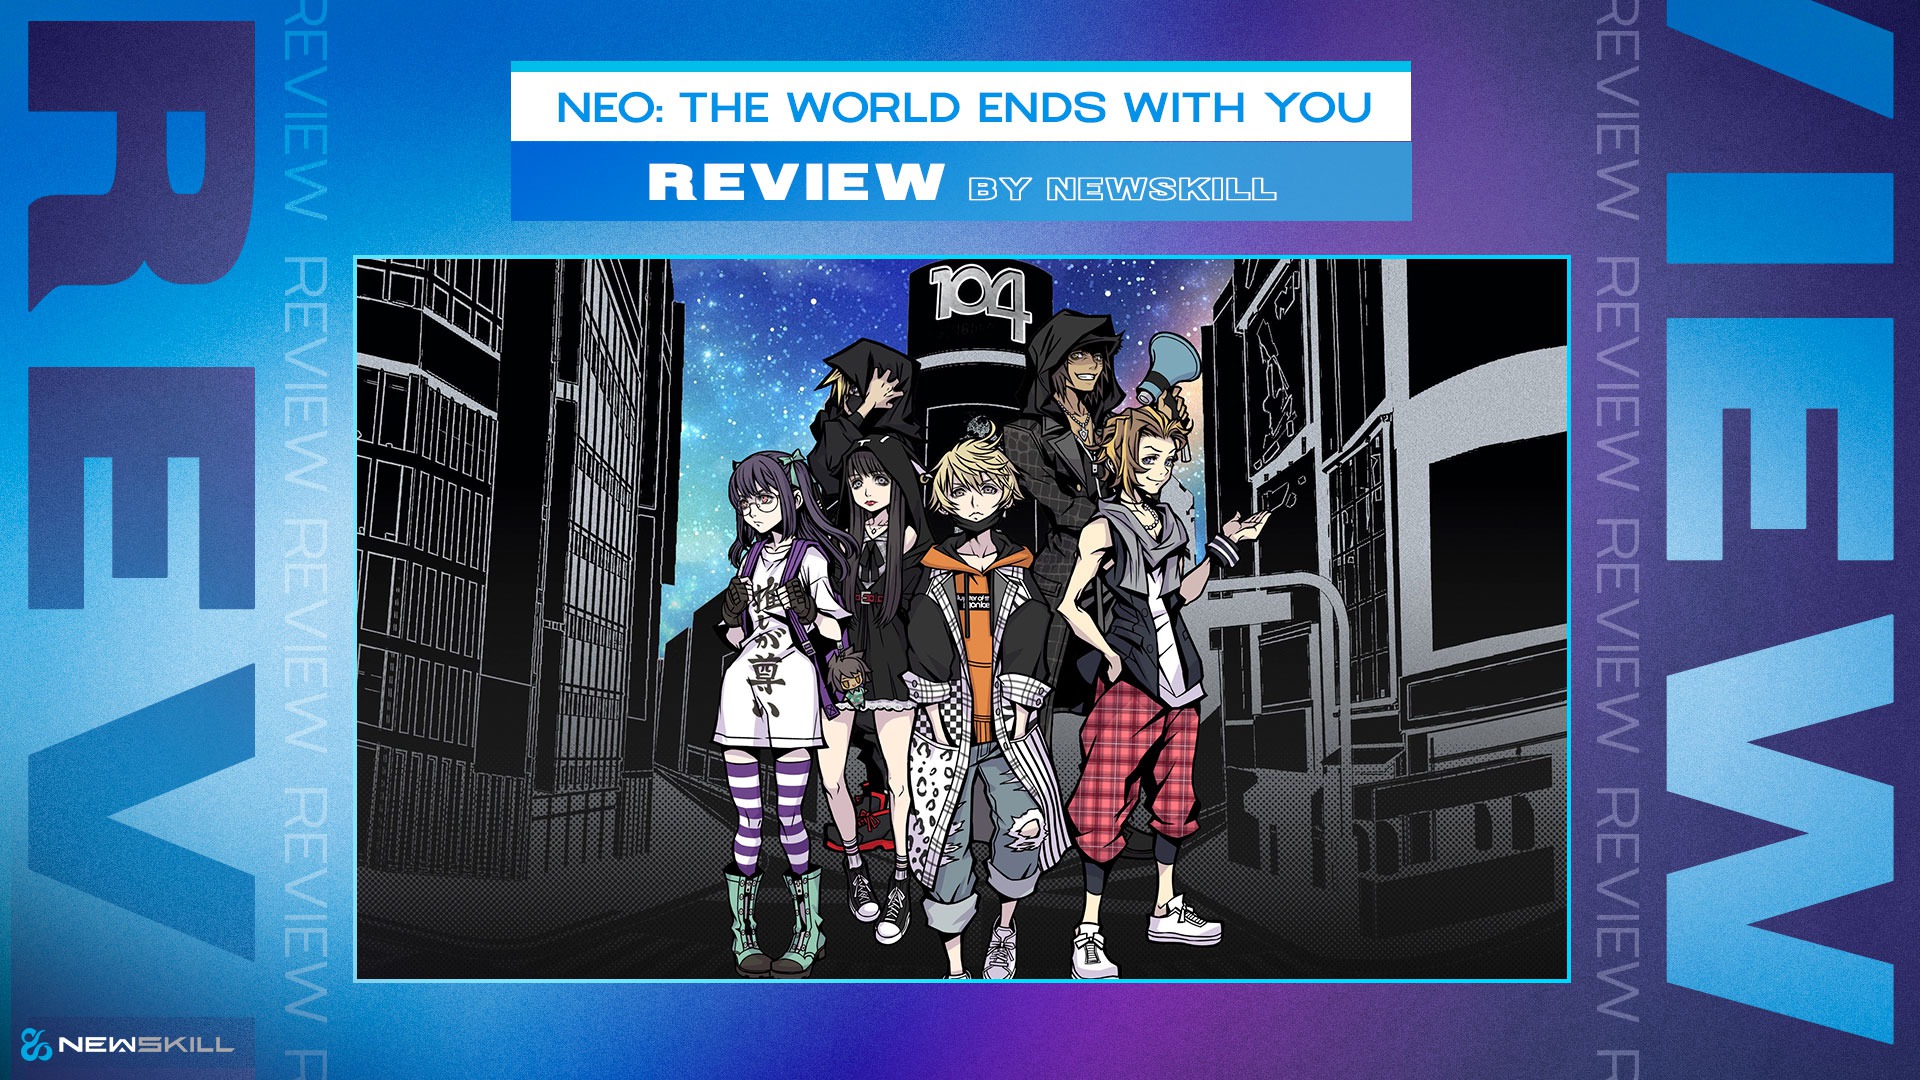 Review of Neo: The World Ends With You: try to escape from the streets of Shibuya